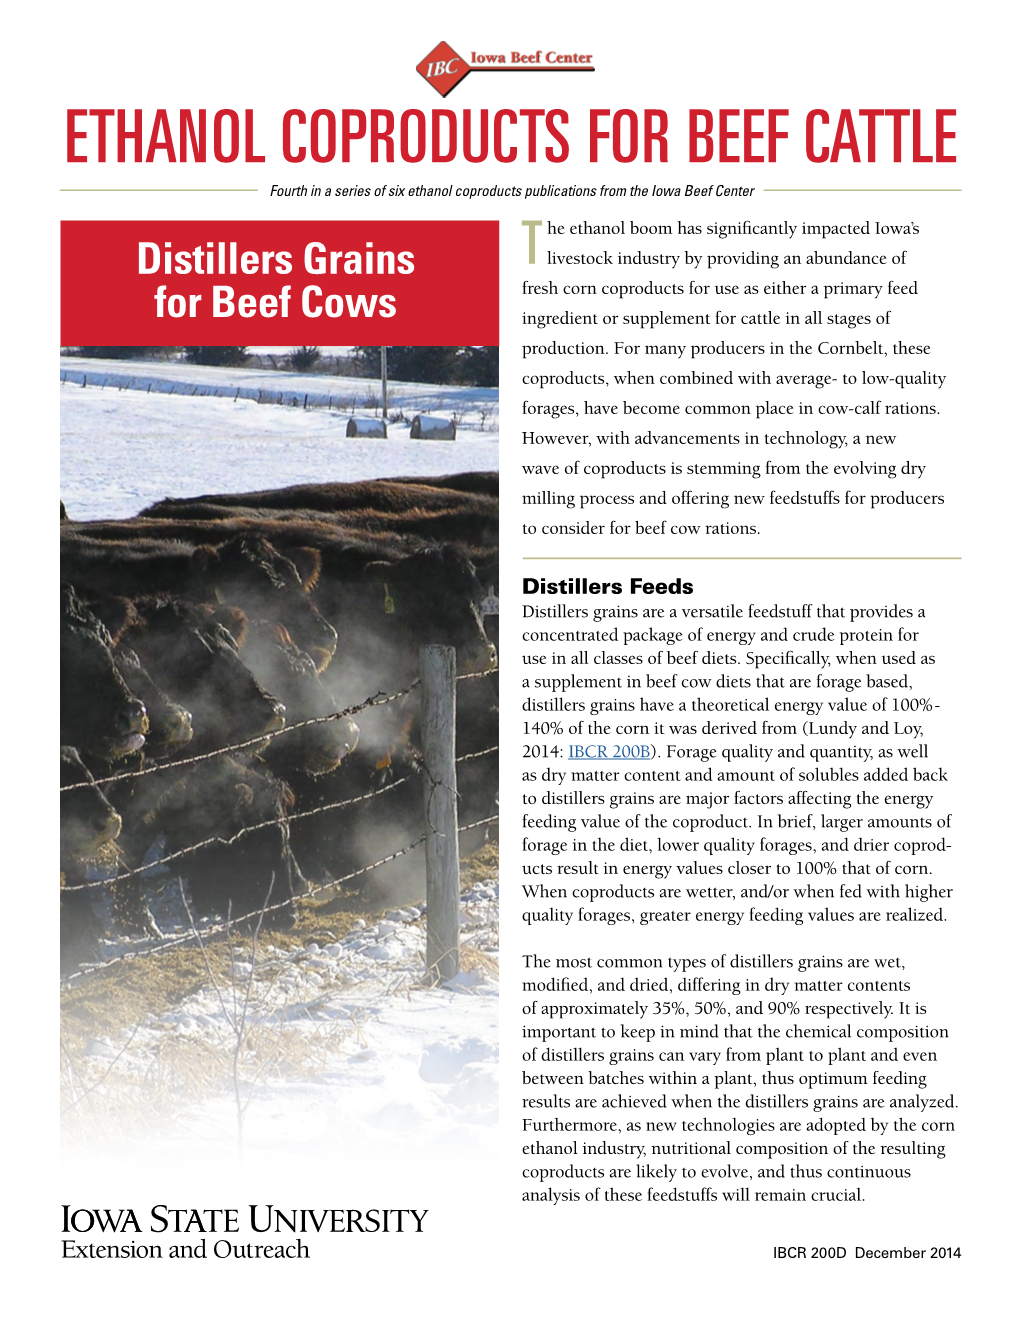 ETHANOL COPRODUCTS for BEEF CATTLE Fourth in a Series of Six Ethanol Coproducts Publications from the Iowa Beef Center